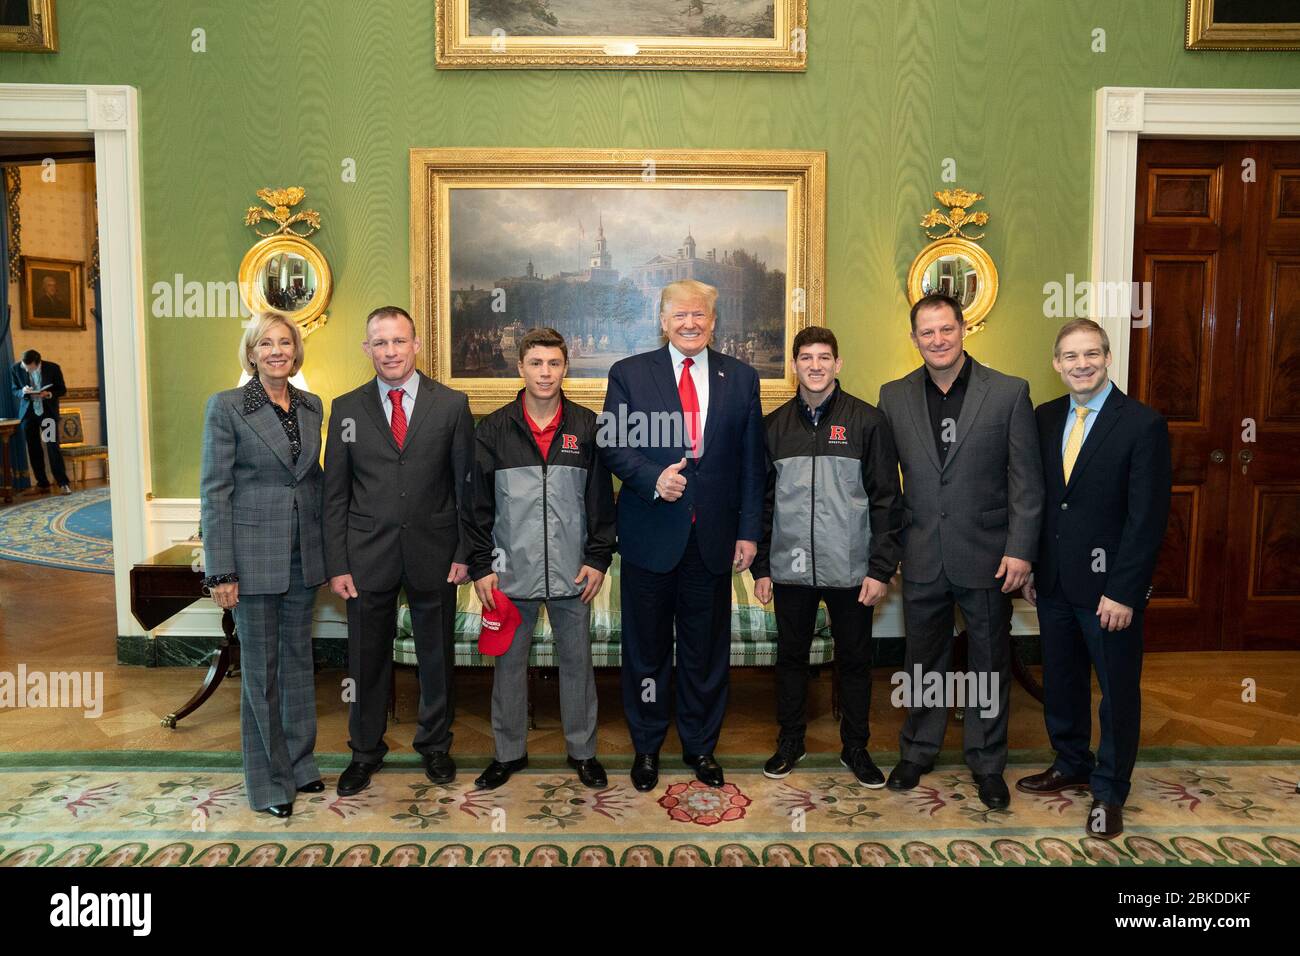 President Donald J. Trump poses with members of the 2019 NCAA Rutgers University Men’s Champion Wrestling team Friday, Nov. 22, 2019, during the NCAA Collegiate National Champions Day in the Green Room of the White House. President Trump Greets NCAA National Champions Stock Photo